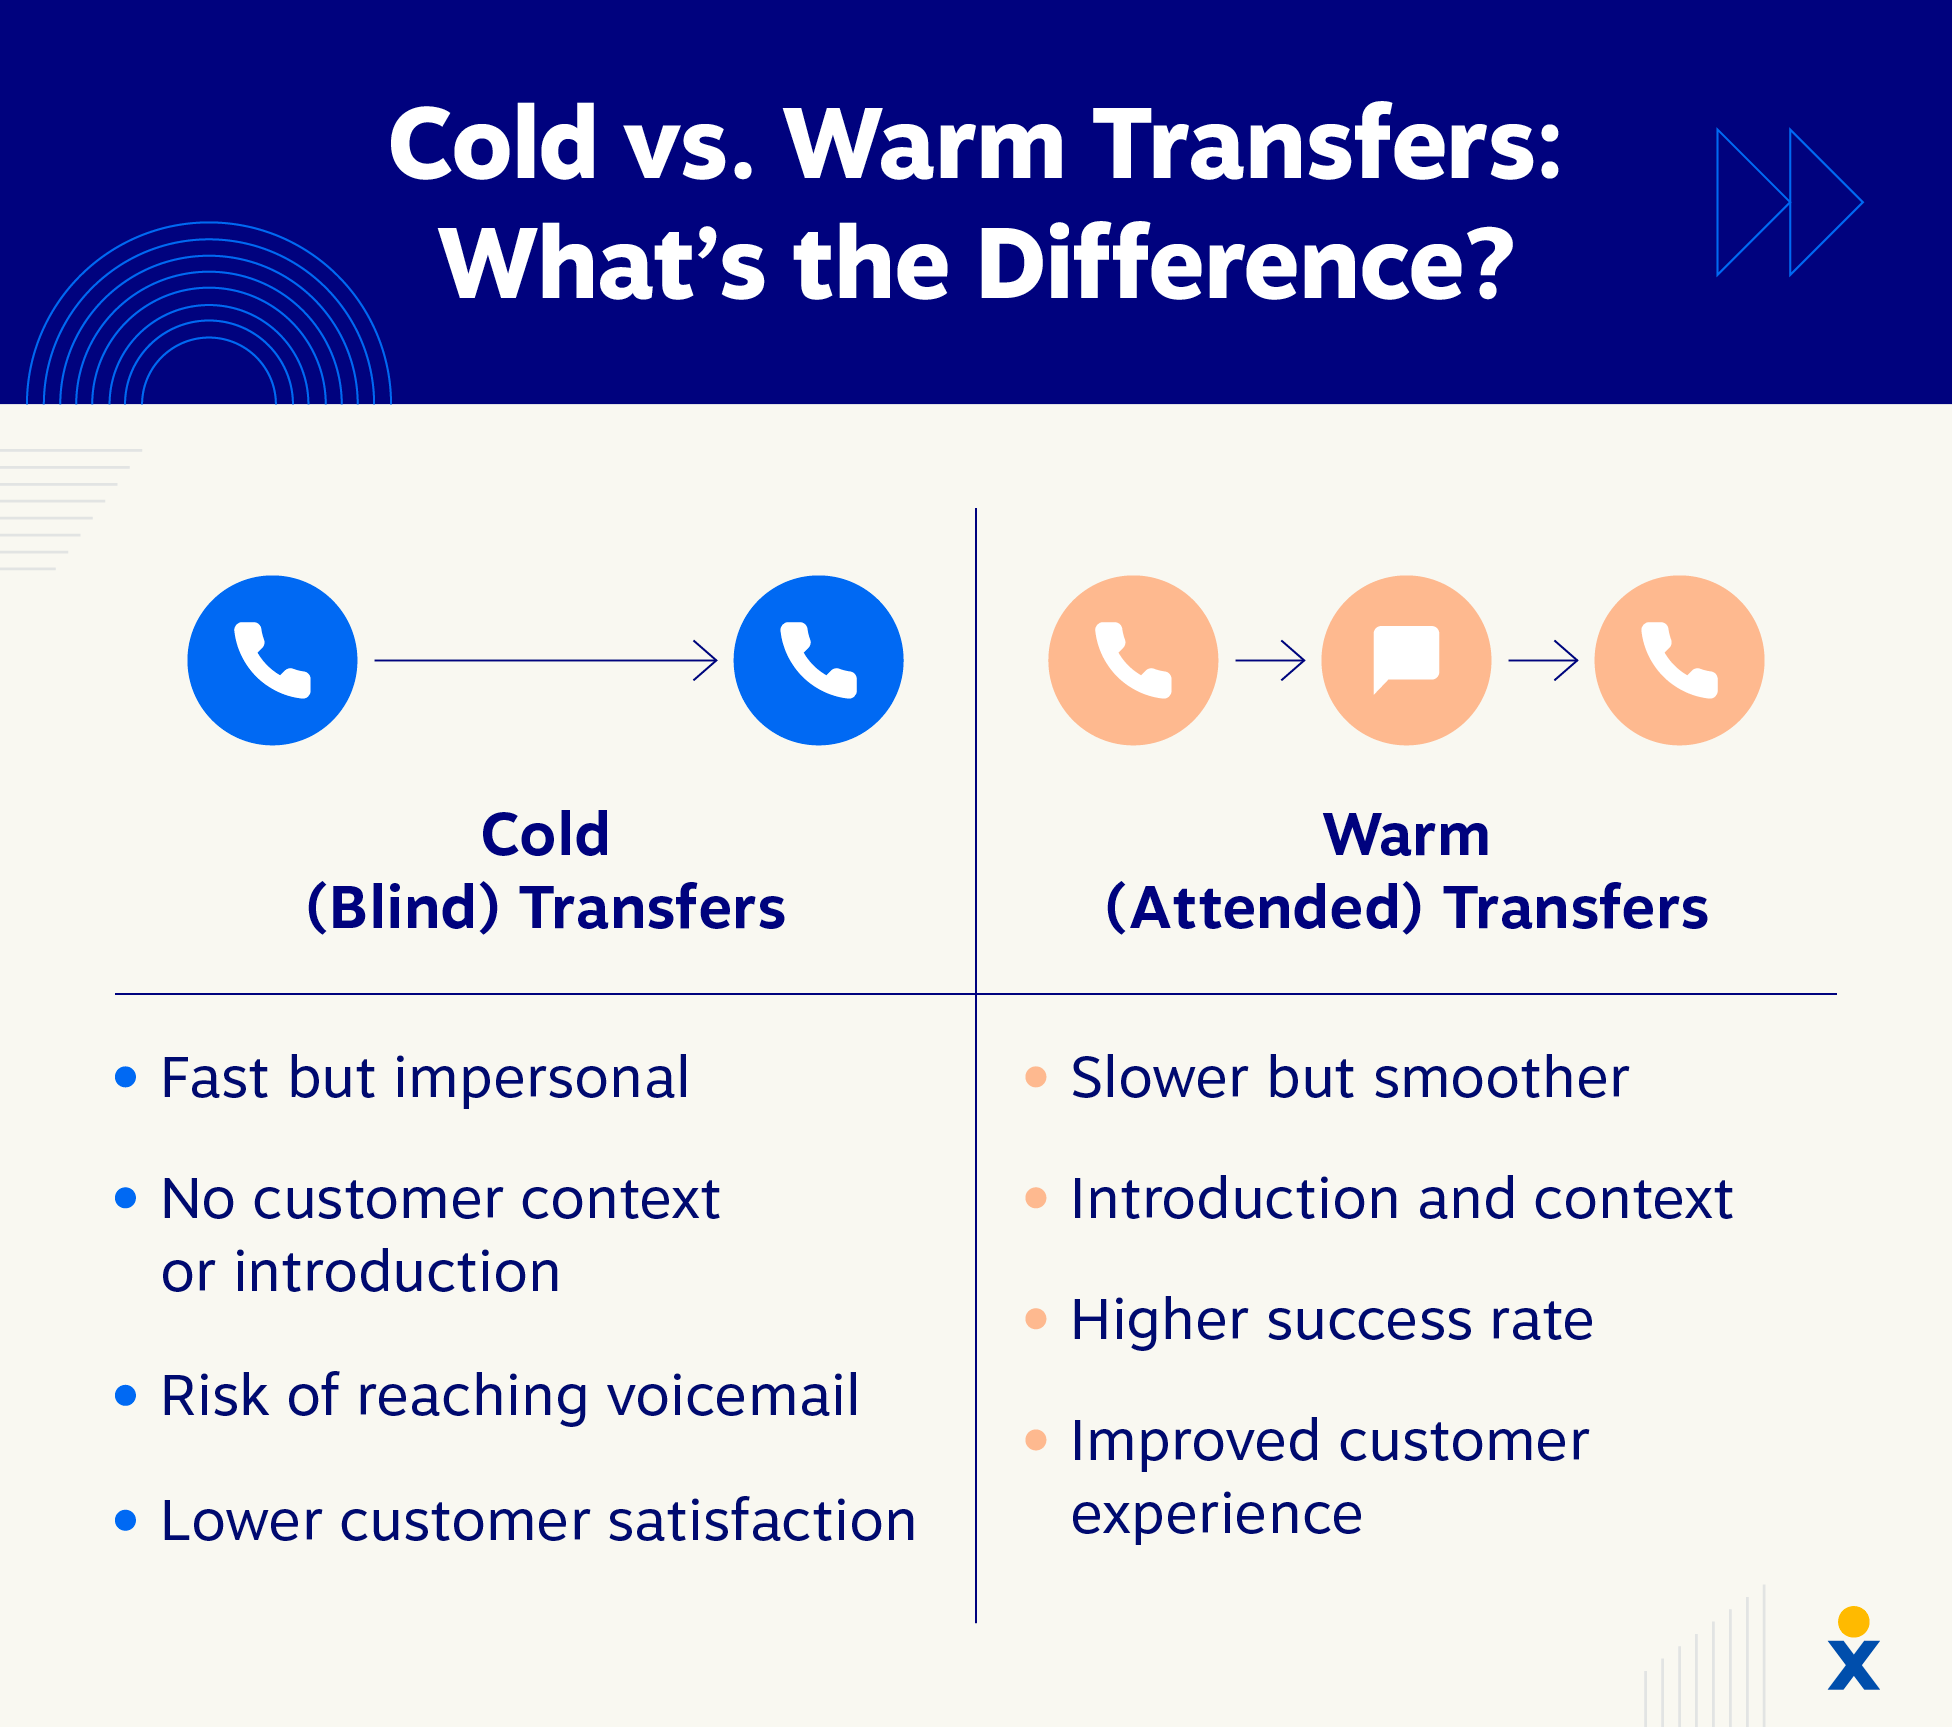 A comparison chart explains the difference between cold and warm transfers.